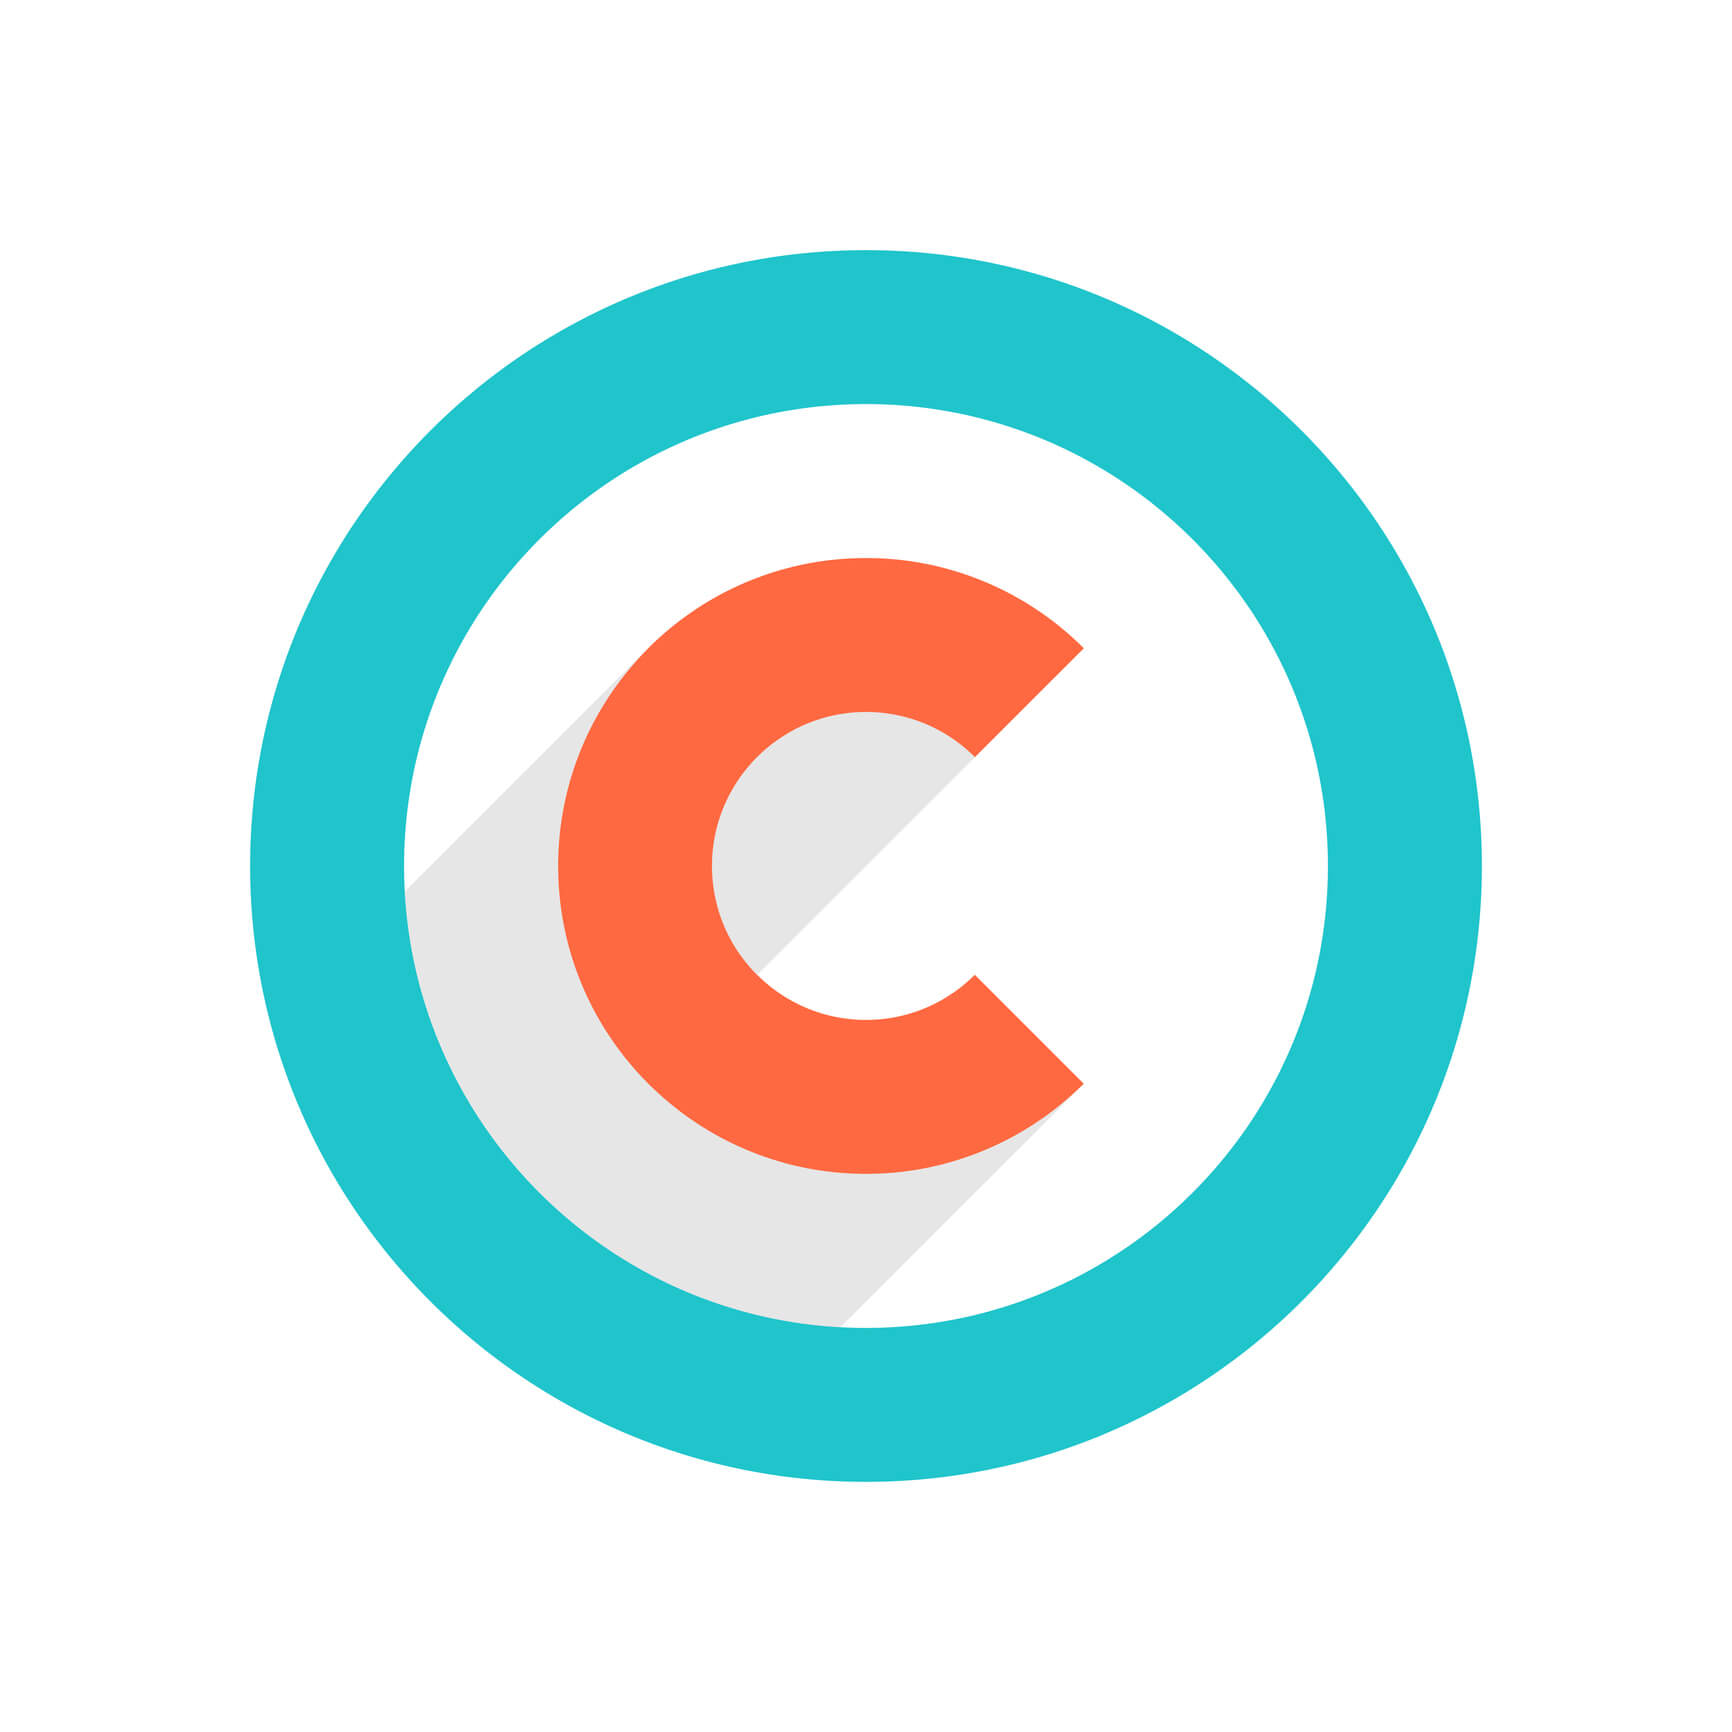 The copyright symbol, or copyright sign, letter C in circle in flat long drop shadow style. Graphic element for design saved as an vector illustration in file format EPS